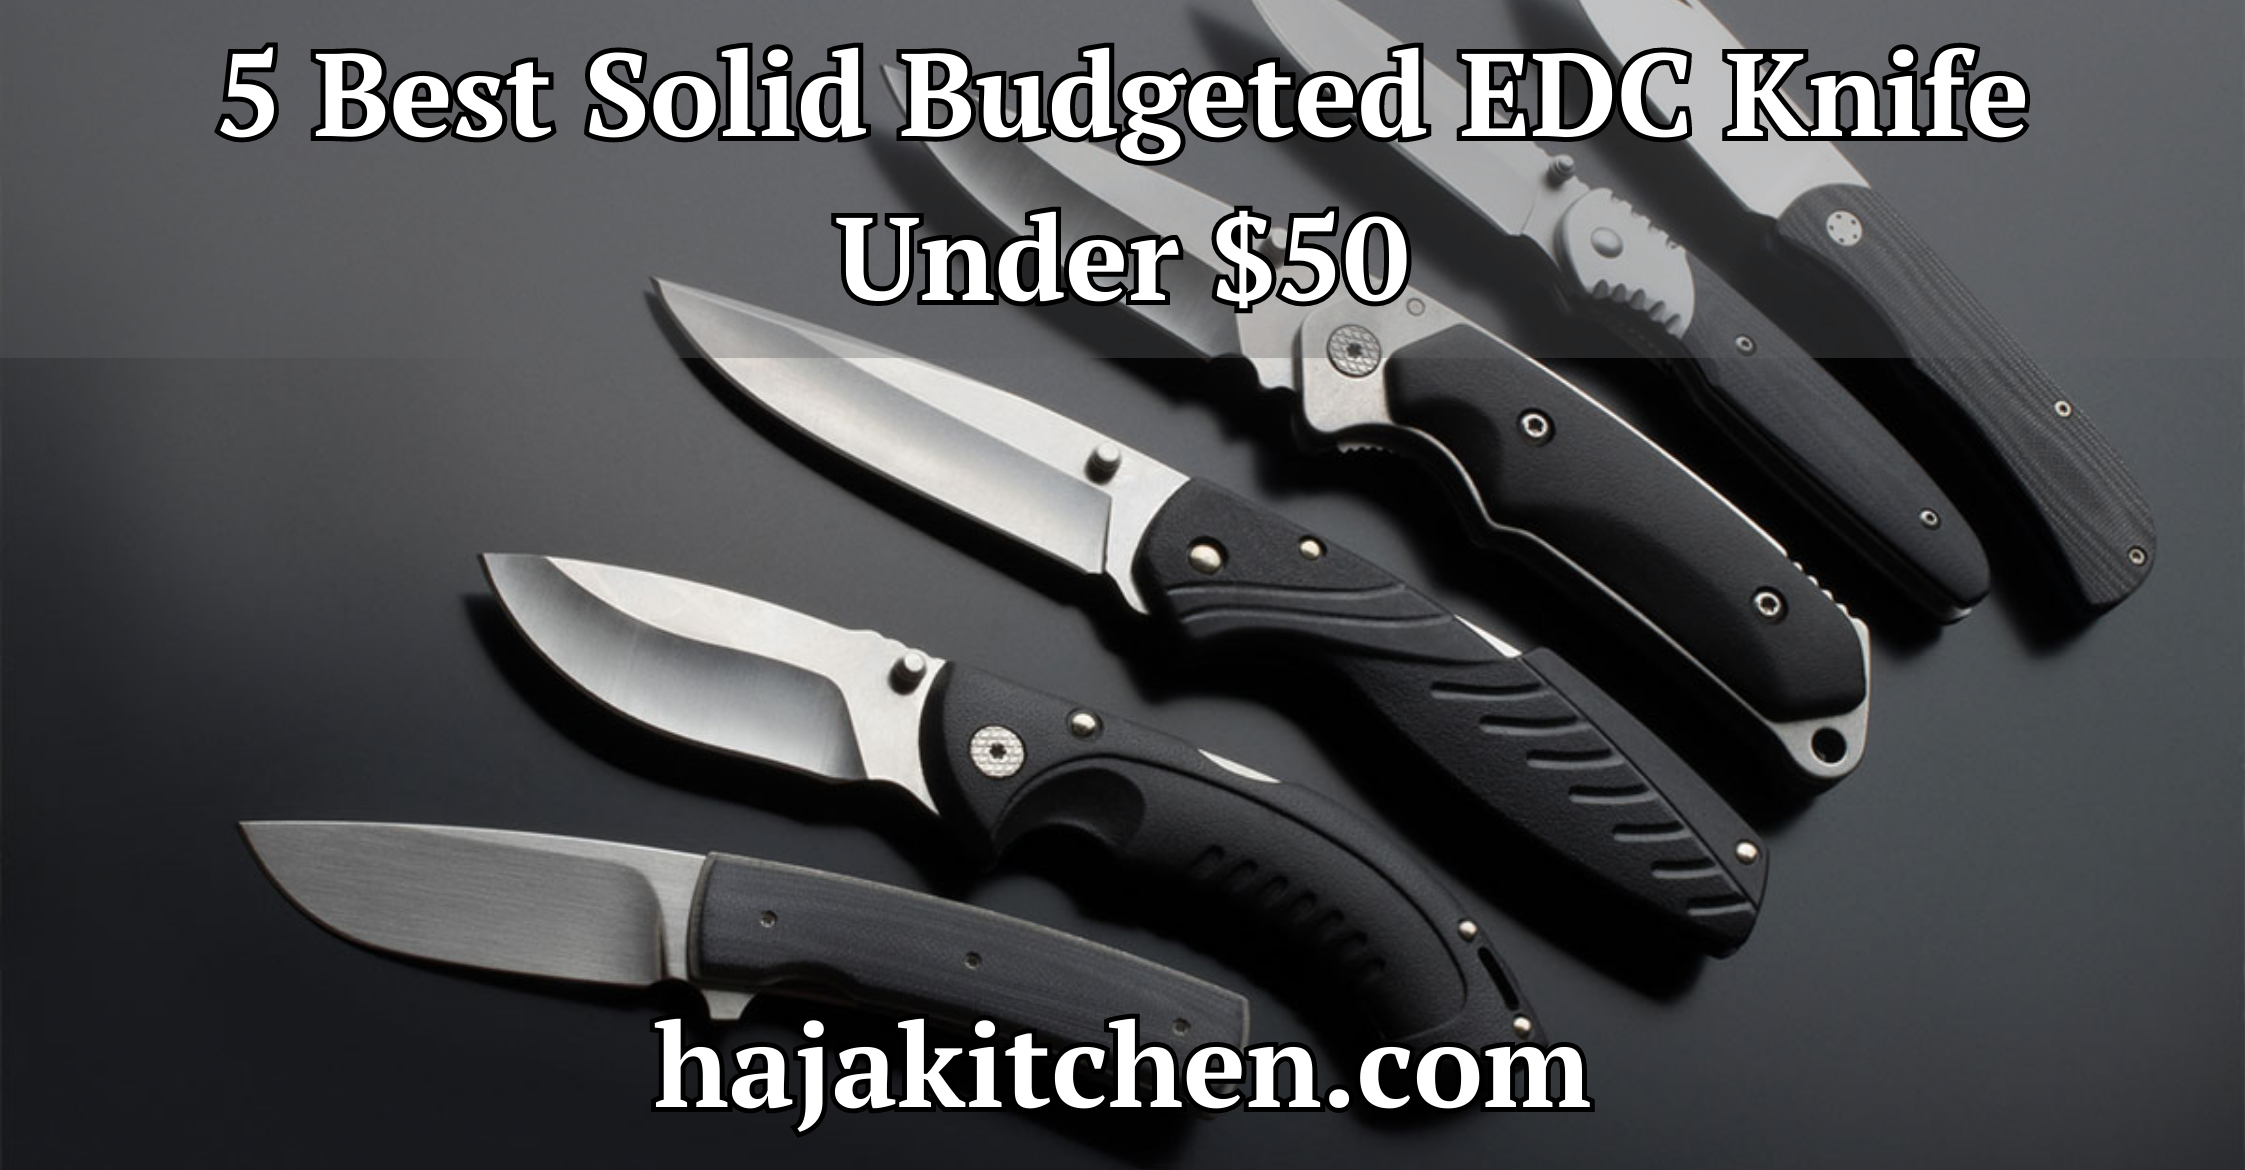 5 Best Solid Budgeted EDC Knife Under $50